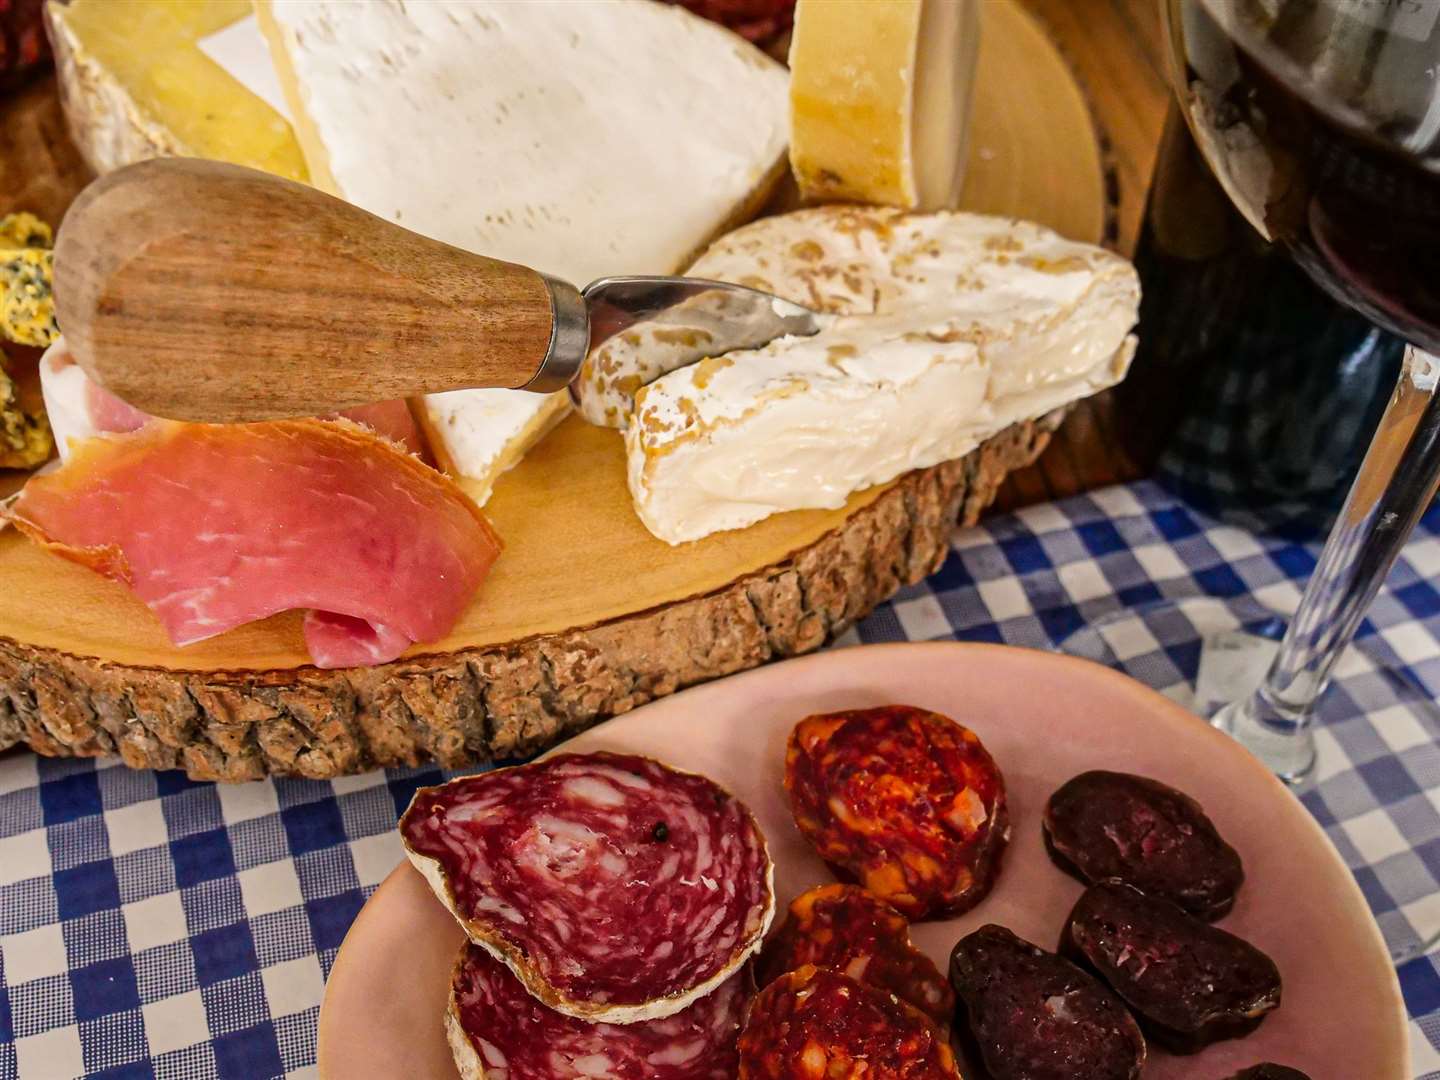 Cheese and charcuterie will be served alongside wine at Vine (23426681)